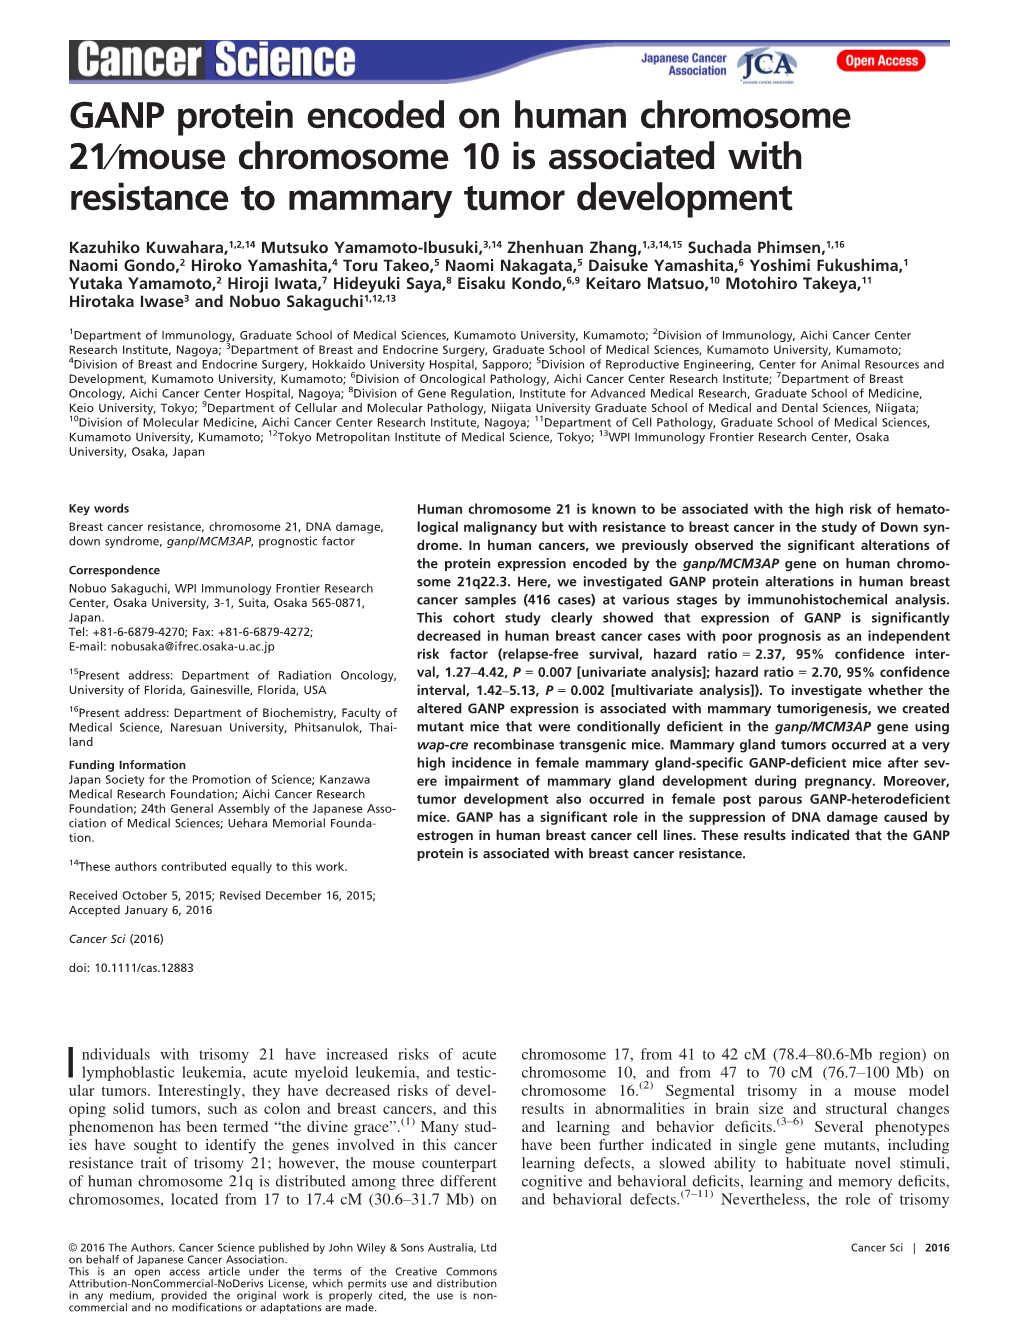 Mouse Chromosome 10 Is Associated with Resistance to Mammary Tumor Development